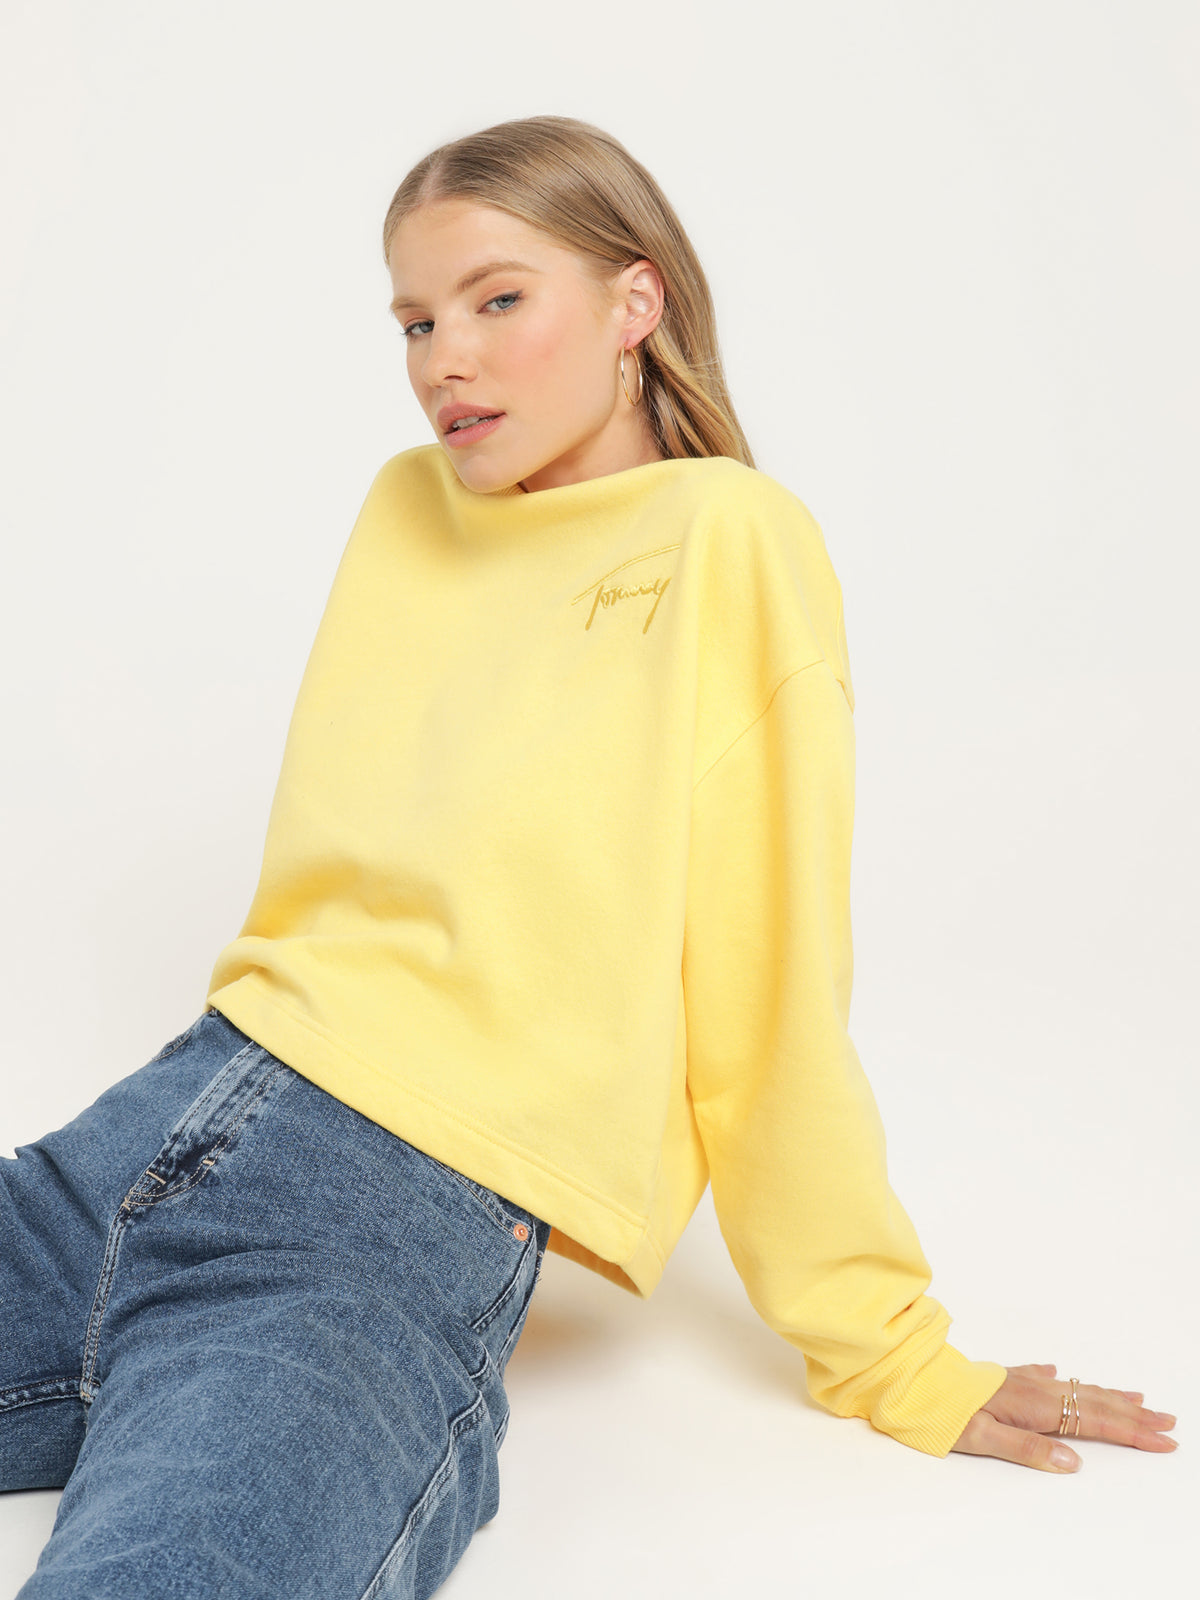 Recycled Signature Logo Cropped Sweatshirt in Soleil Yellow